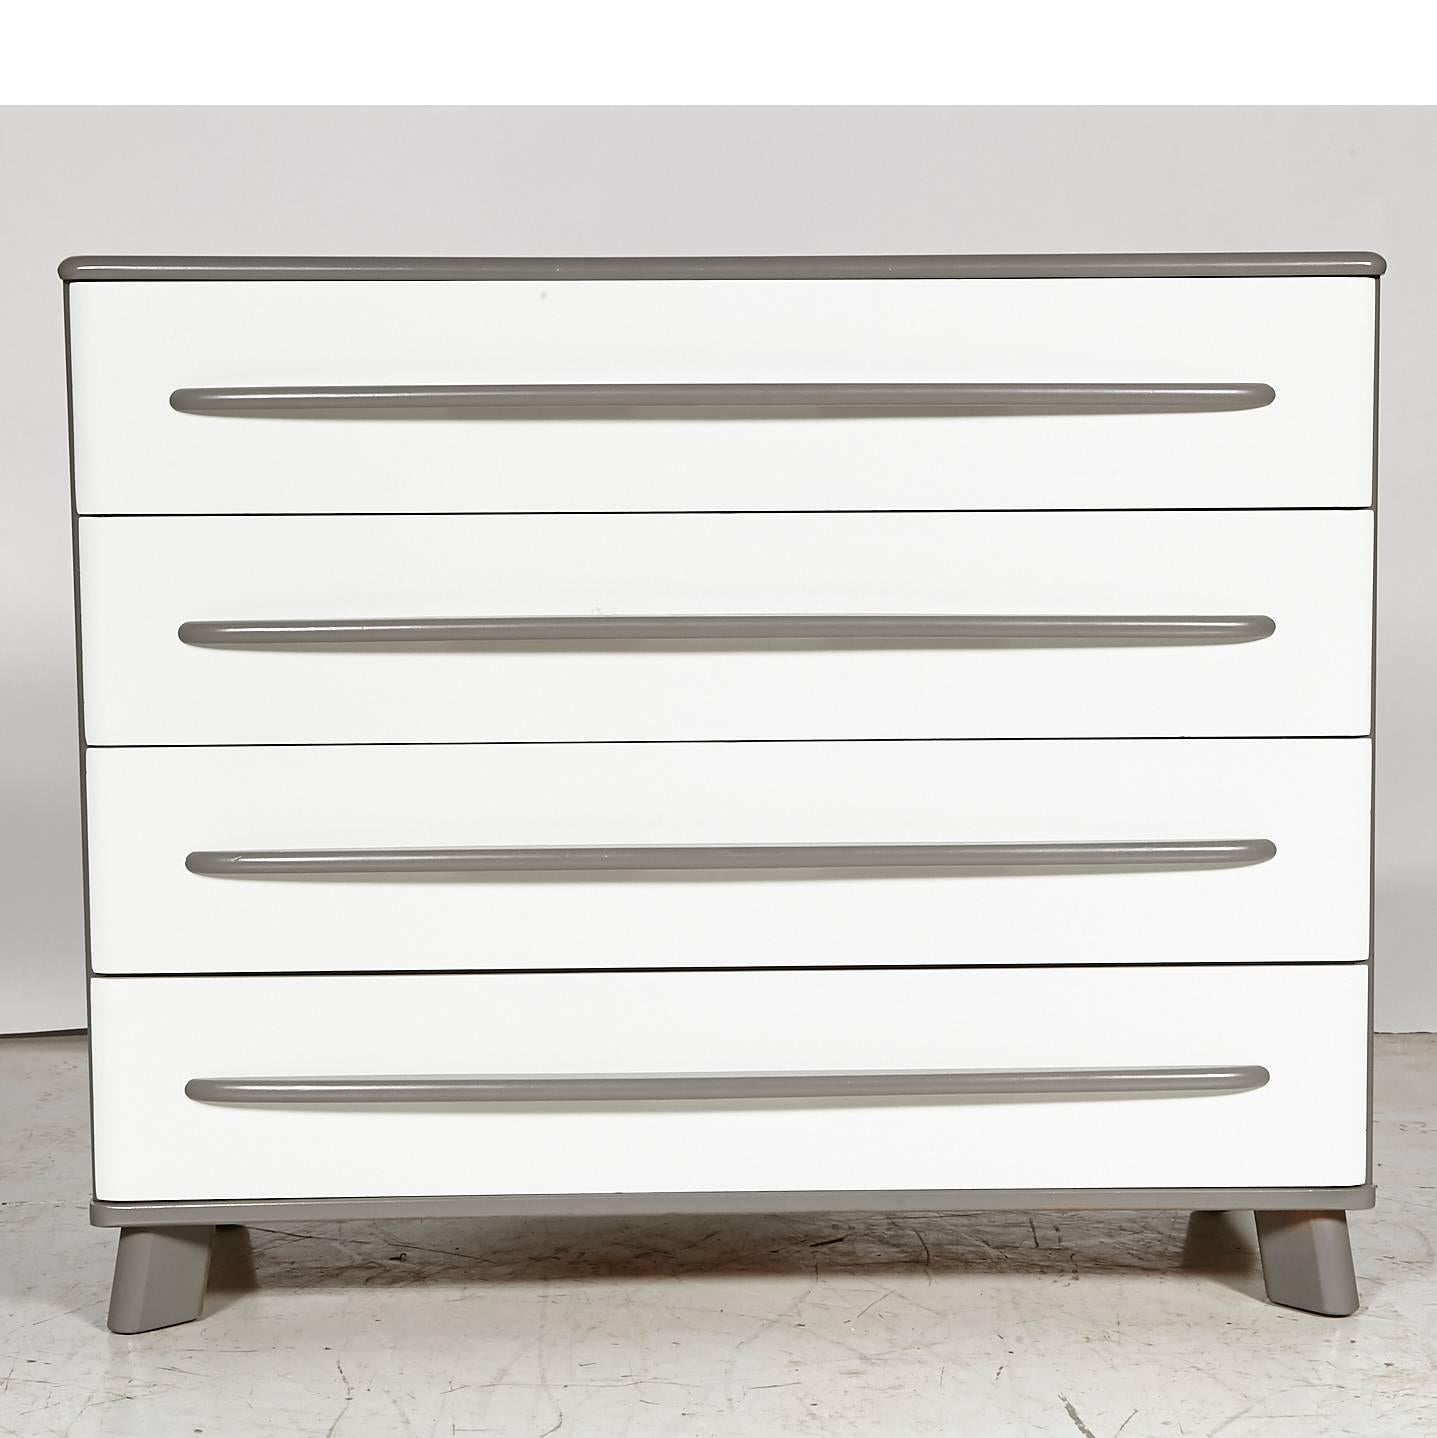 Vintage 1950s maple wood low dresser with four drawers newly rehabilitated in a grey and white lacquered finish. No maker's mark.